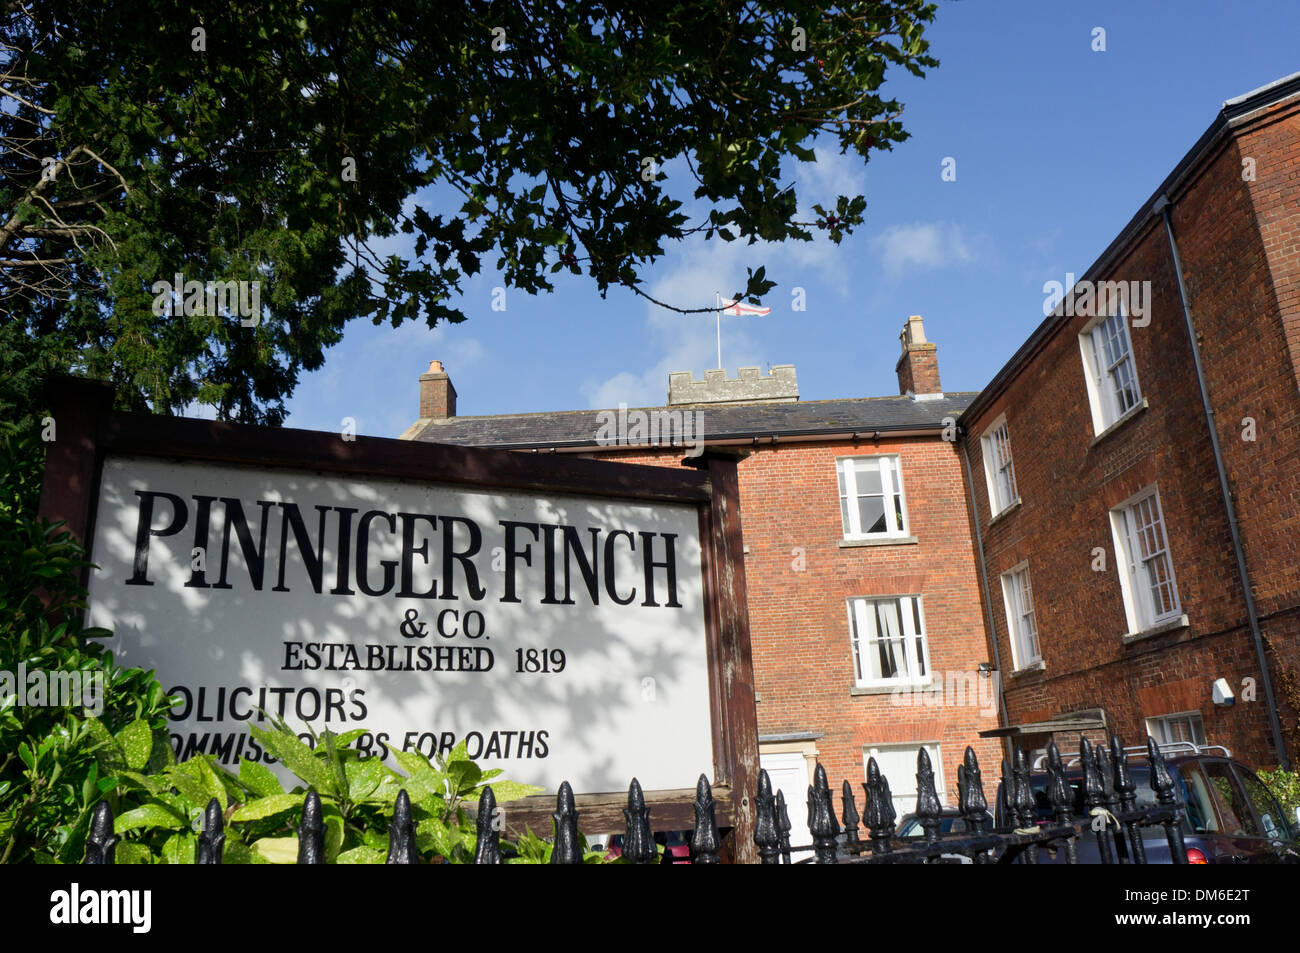 The premises of Pinniger Finch, Solicitors and Commissioners for Oaths in Westbury, Wiltshire, established in 1819. Stock Photo